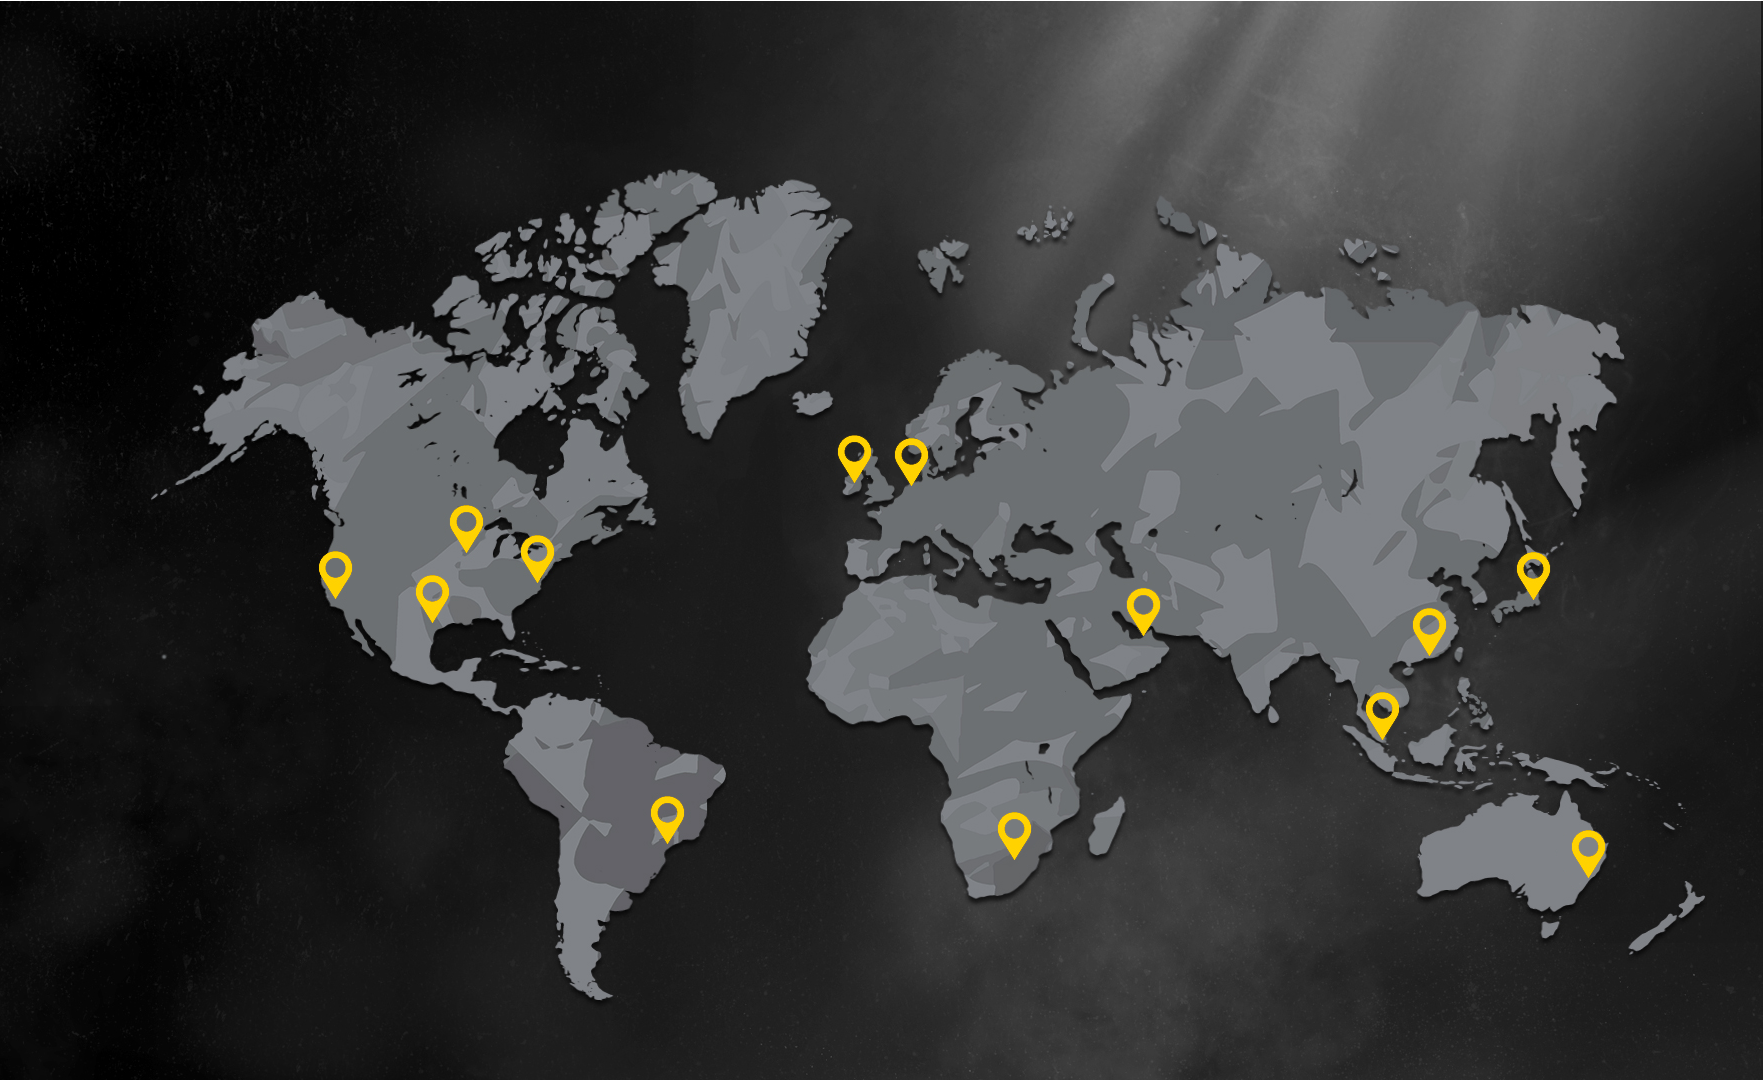 Information about data centres for Rainbow Six Siege